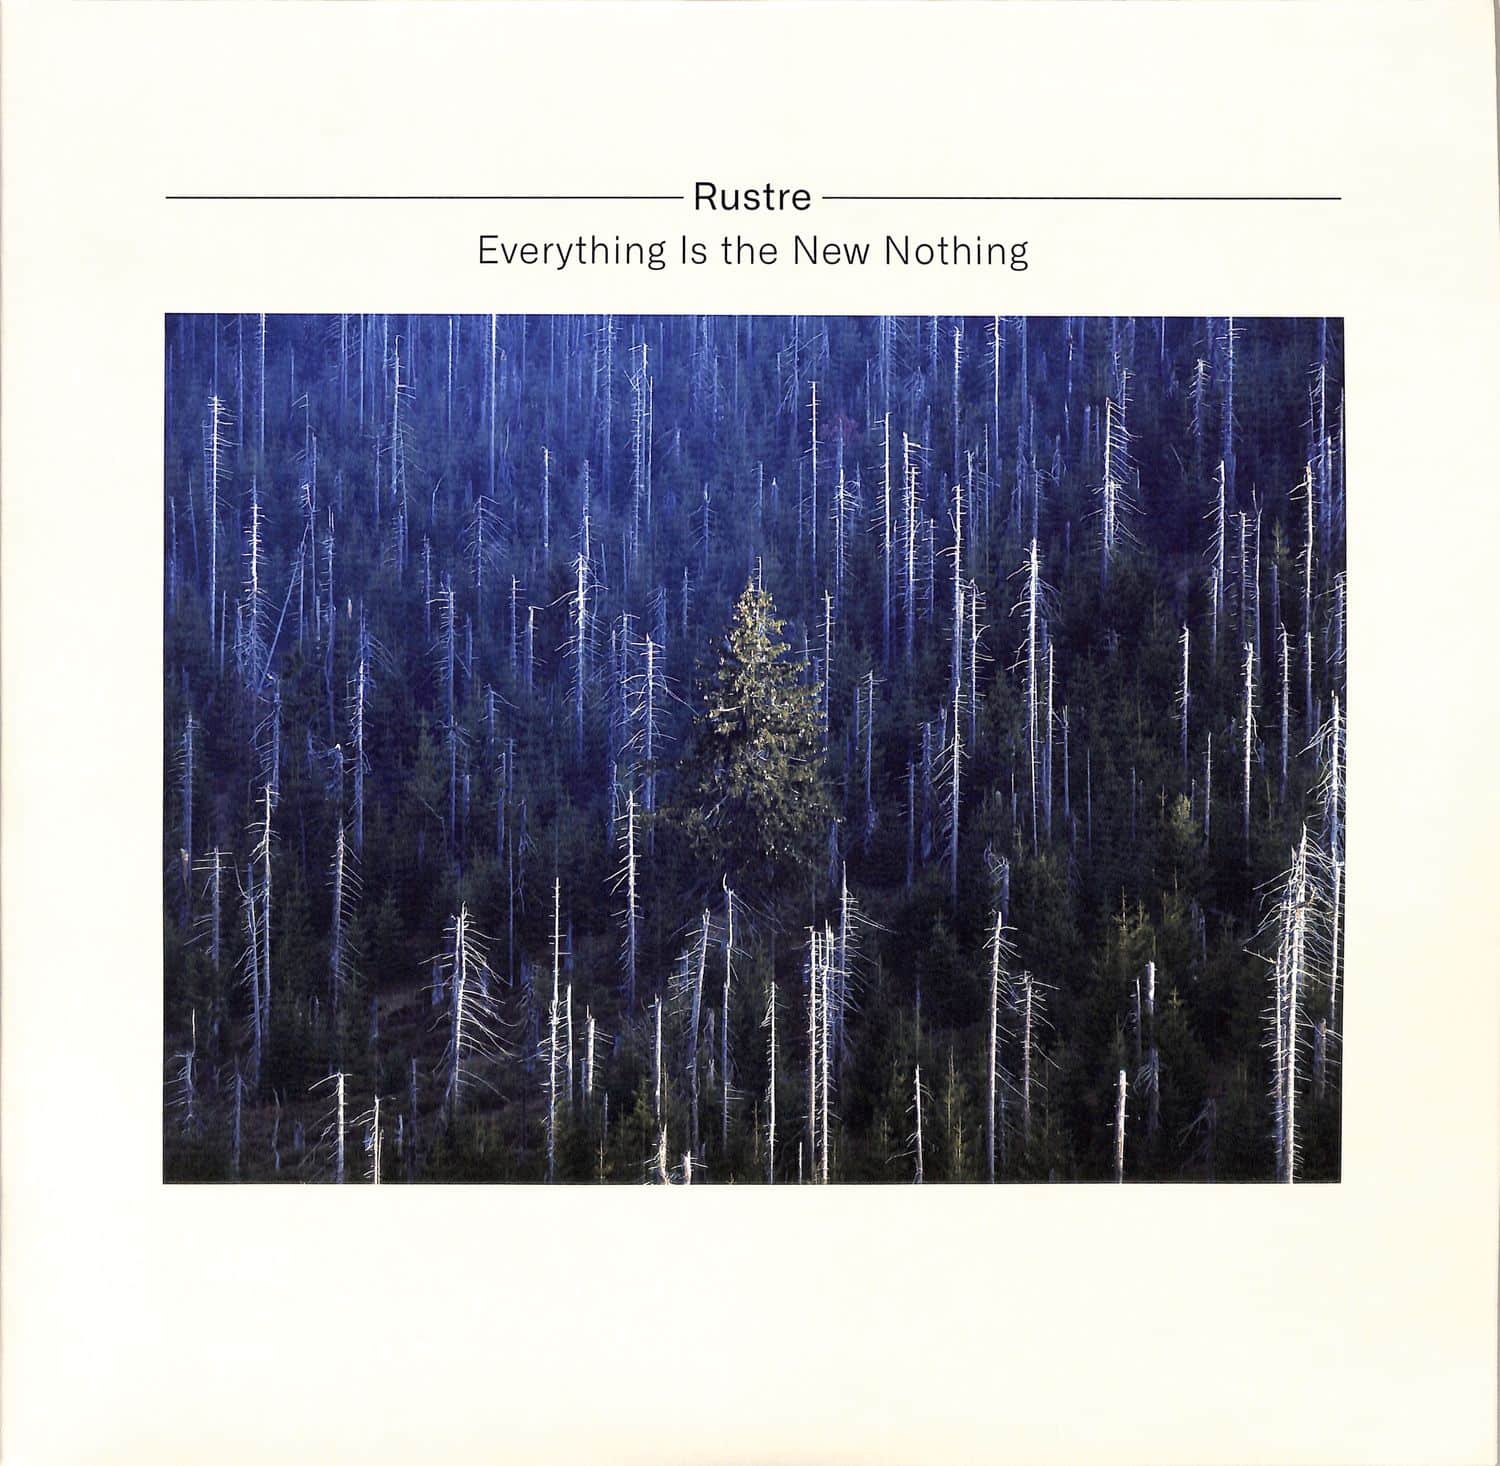 Rustre - EVERYTHING IS THE NEW NOTHING / EVERYTHING IS THE NEW SOMETHING 